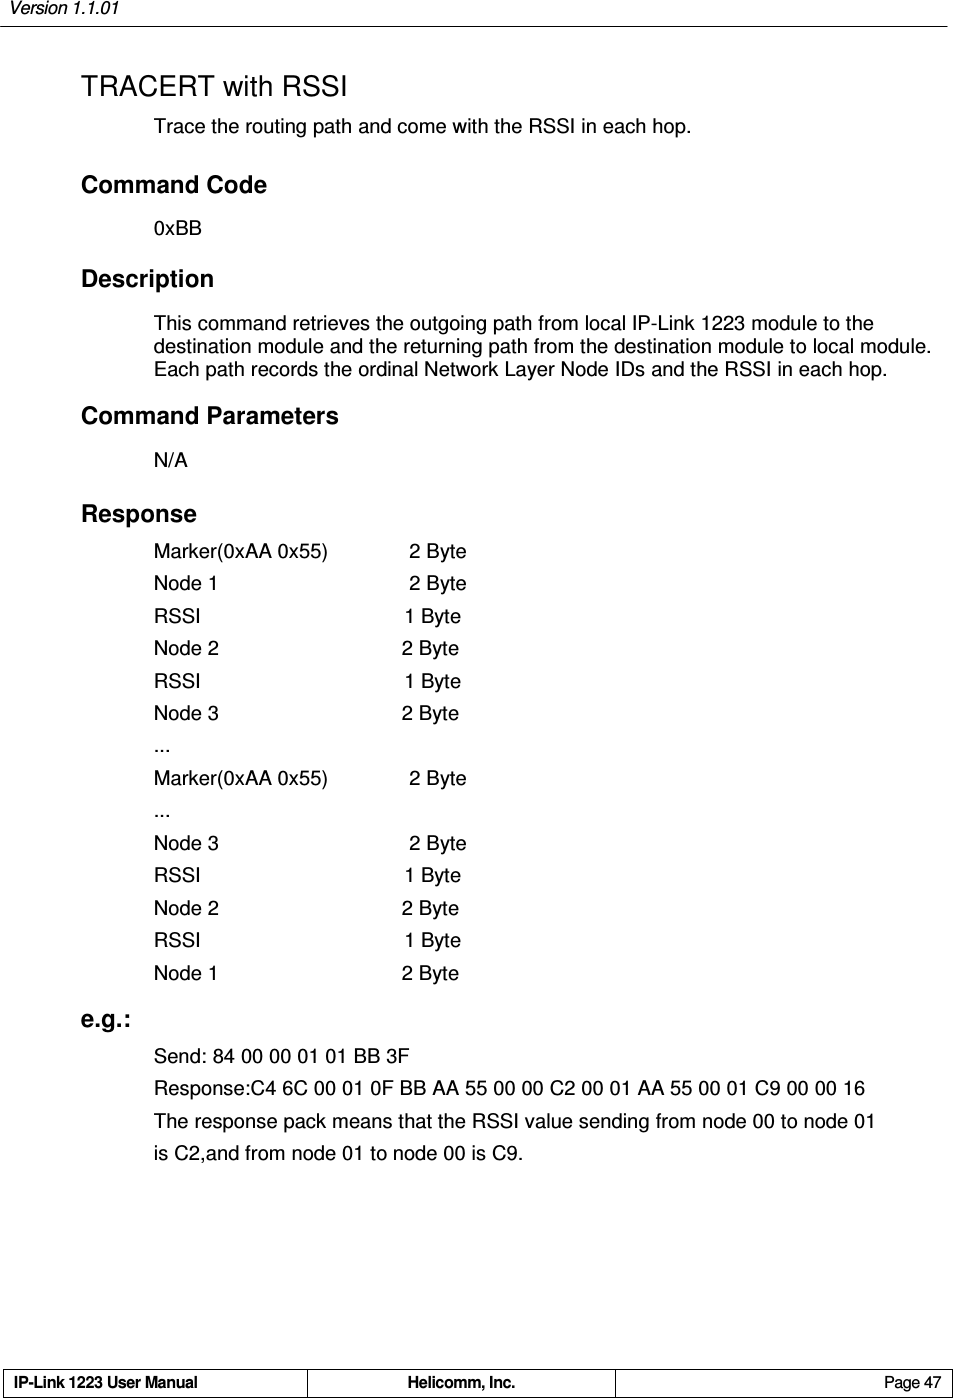 Version 1.1.01     IP-Link 1223 User Manual  Helicomm, Inc.  Page 47   TRACERT with RSSI Trace the routing path and come with the RSSI in each hop. Command Code 0xBB Description This command retrieves the outgoing path from local IP-Link 1223 module to the destination module and the returning path from the destination module to local module. Each path records the ordinal Network Layer Node IDs and the RSSI in each hop. Command Parameters N/A Response Marker(0xAA 0x55)  2 Byte   Node 1  2 Byte RSSI                                        1 Byte Node 2                                    2 Byte RSSI                                        1 Byte Node 3                                    2 Byte ... Marker(0xAA 0x55)  2 Byte ... Node 3  2 Byte RSSI                                        1 Byte Node 2                                    2 Byte RSSI                                        1 Byte Node 1                                    2 Byte e.g.: Send: 84 00 00 01 01 BB 3F Response:C4 6C 00 01 0F BB AA 55 00 00 C2 00 01 AA 55 00 01 C9 00 00 16 The response pack means that the RSSI value sending from node 00 to node 01   is C2,and from node 01 to node 00 is C9. 